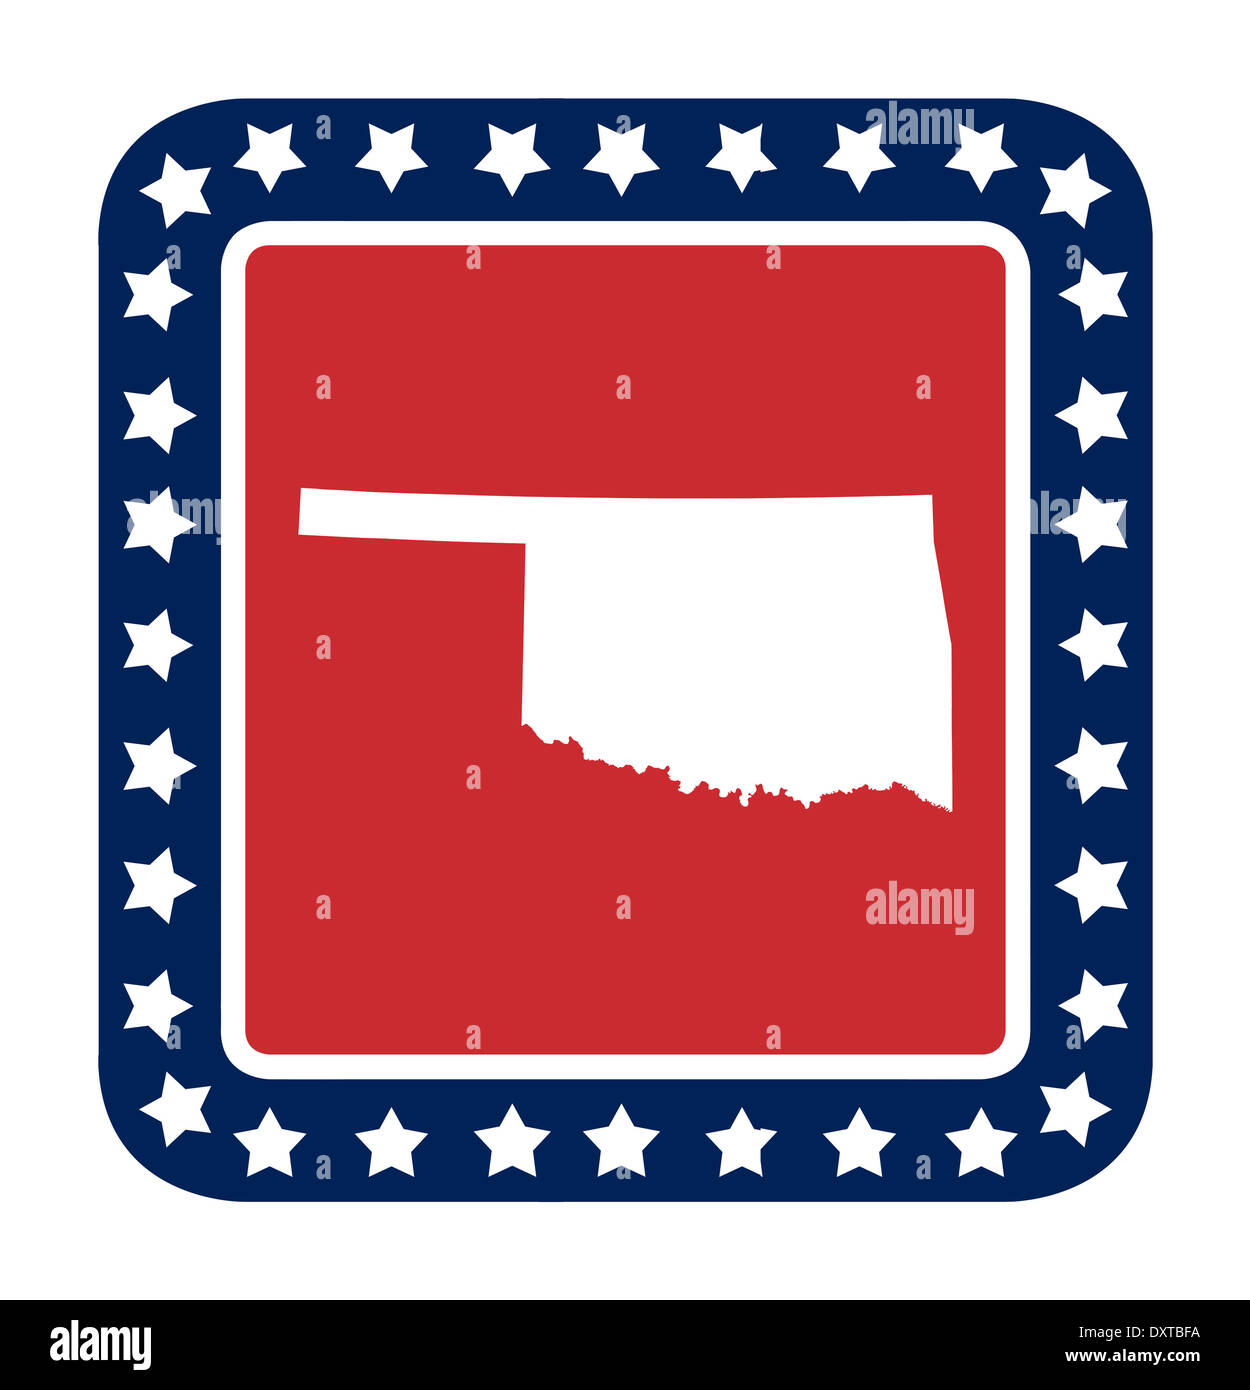 Oklahoma state button on American flag in flat web design style, isolated on white background. Stock Photo